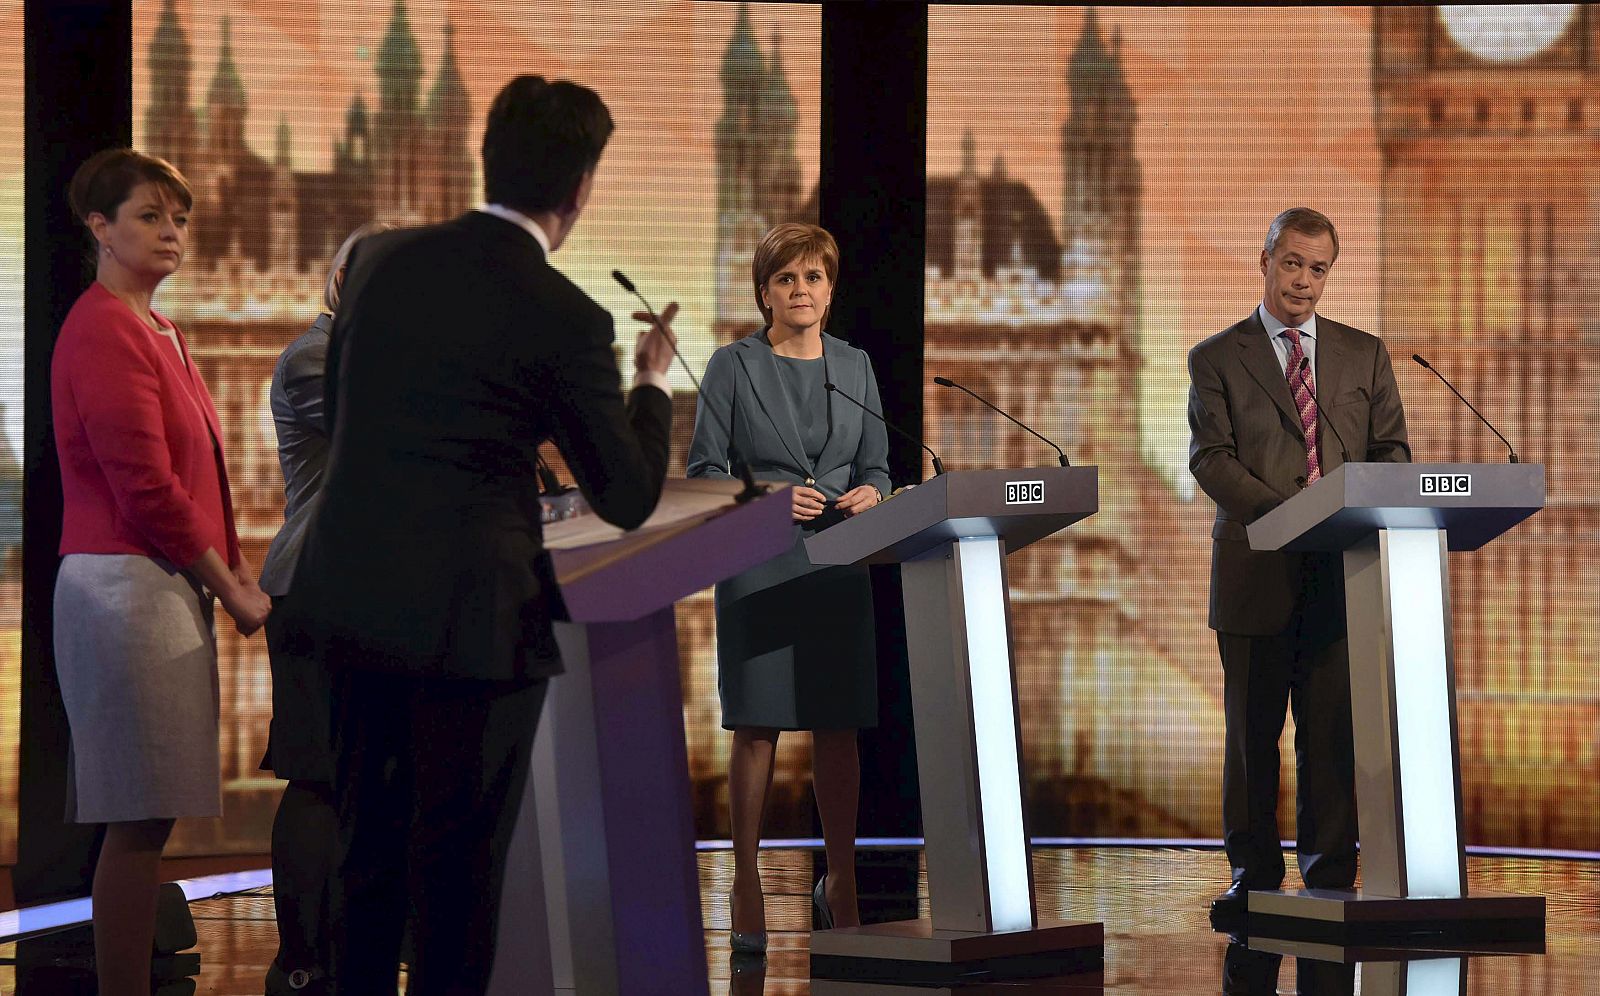 Britain's political leaders participate in a televised debate in London